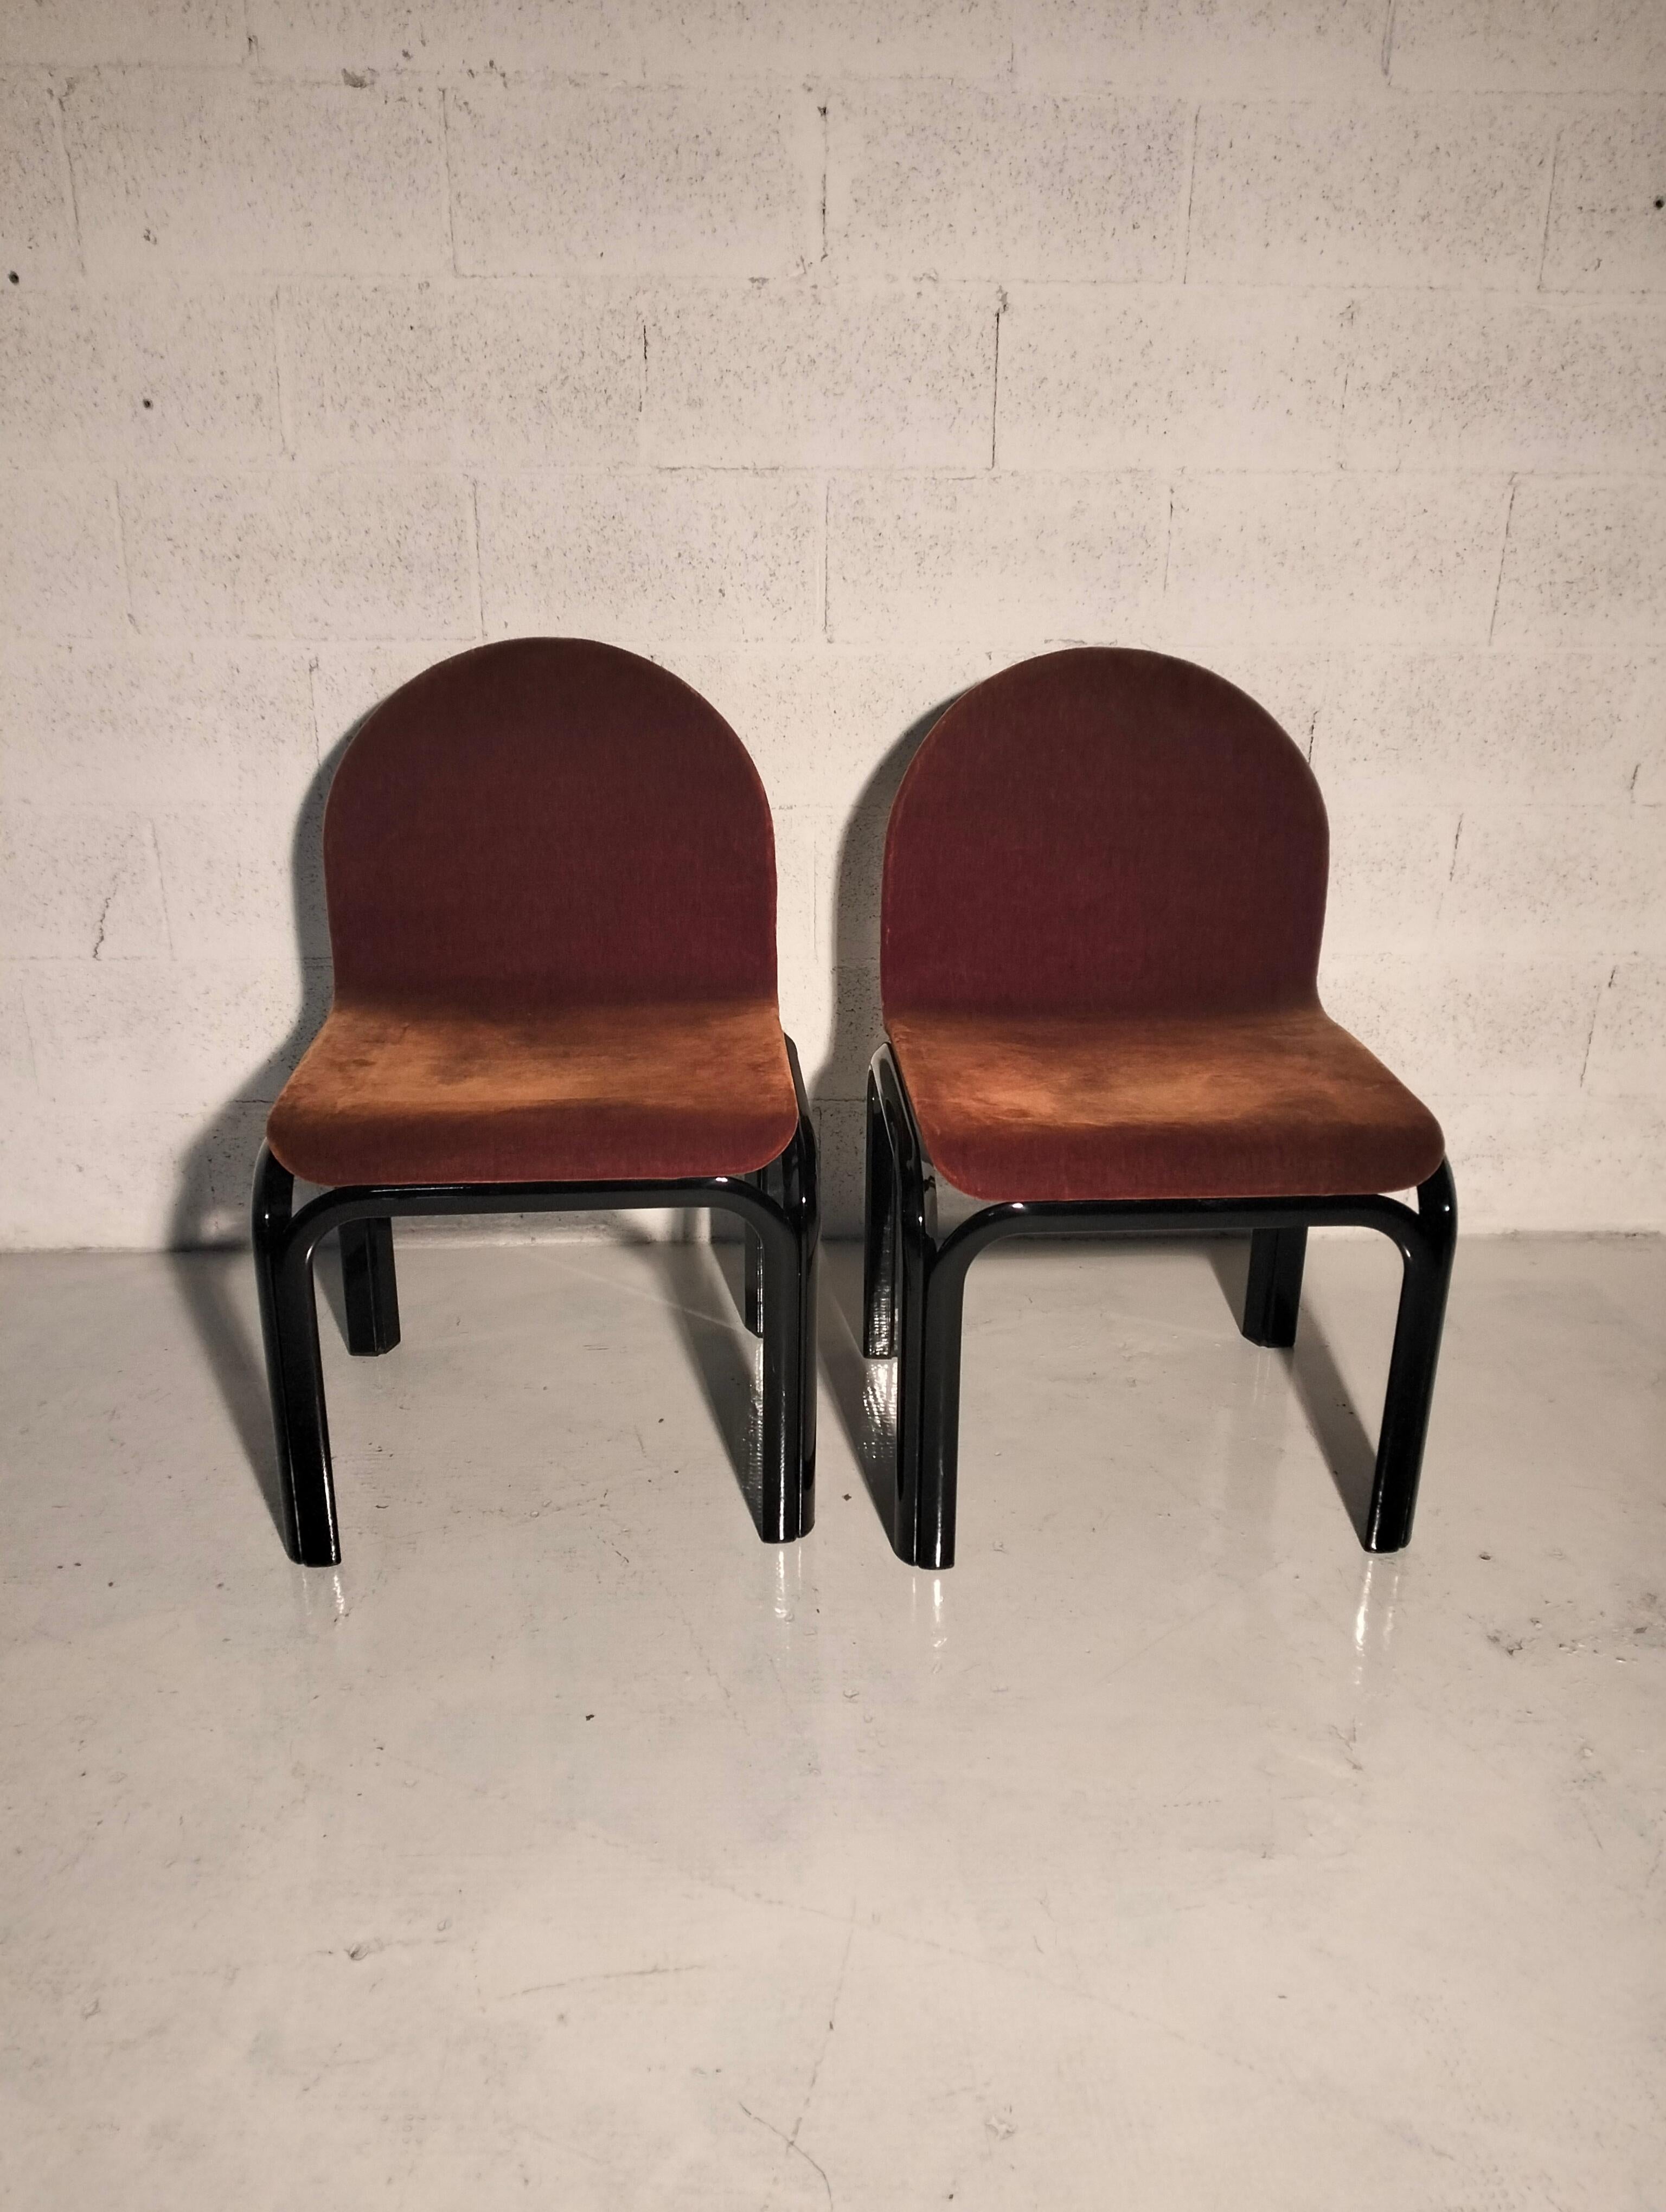 Set of 4 chairs and 1 square table Orsay mod. by Gae Aulenti for Knoll 80s For Sale 6